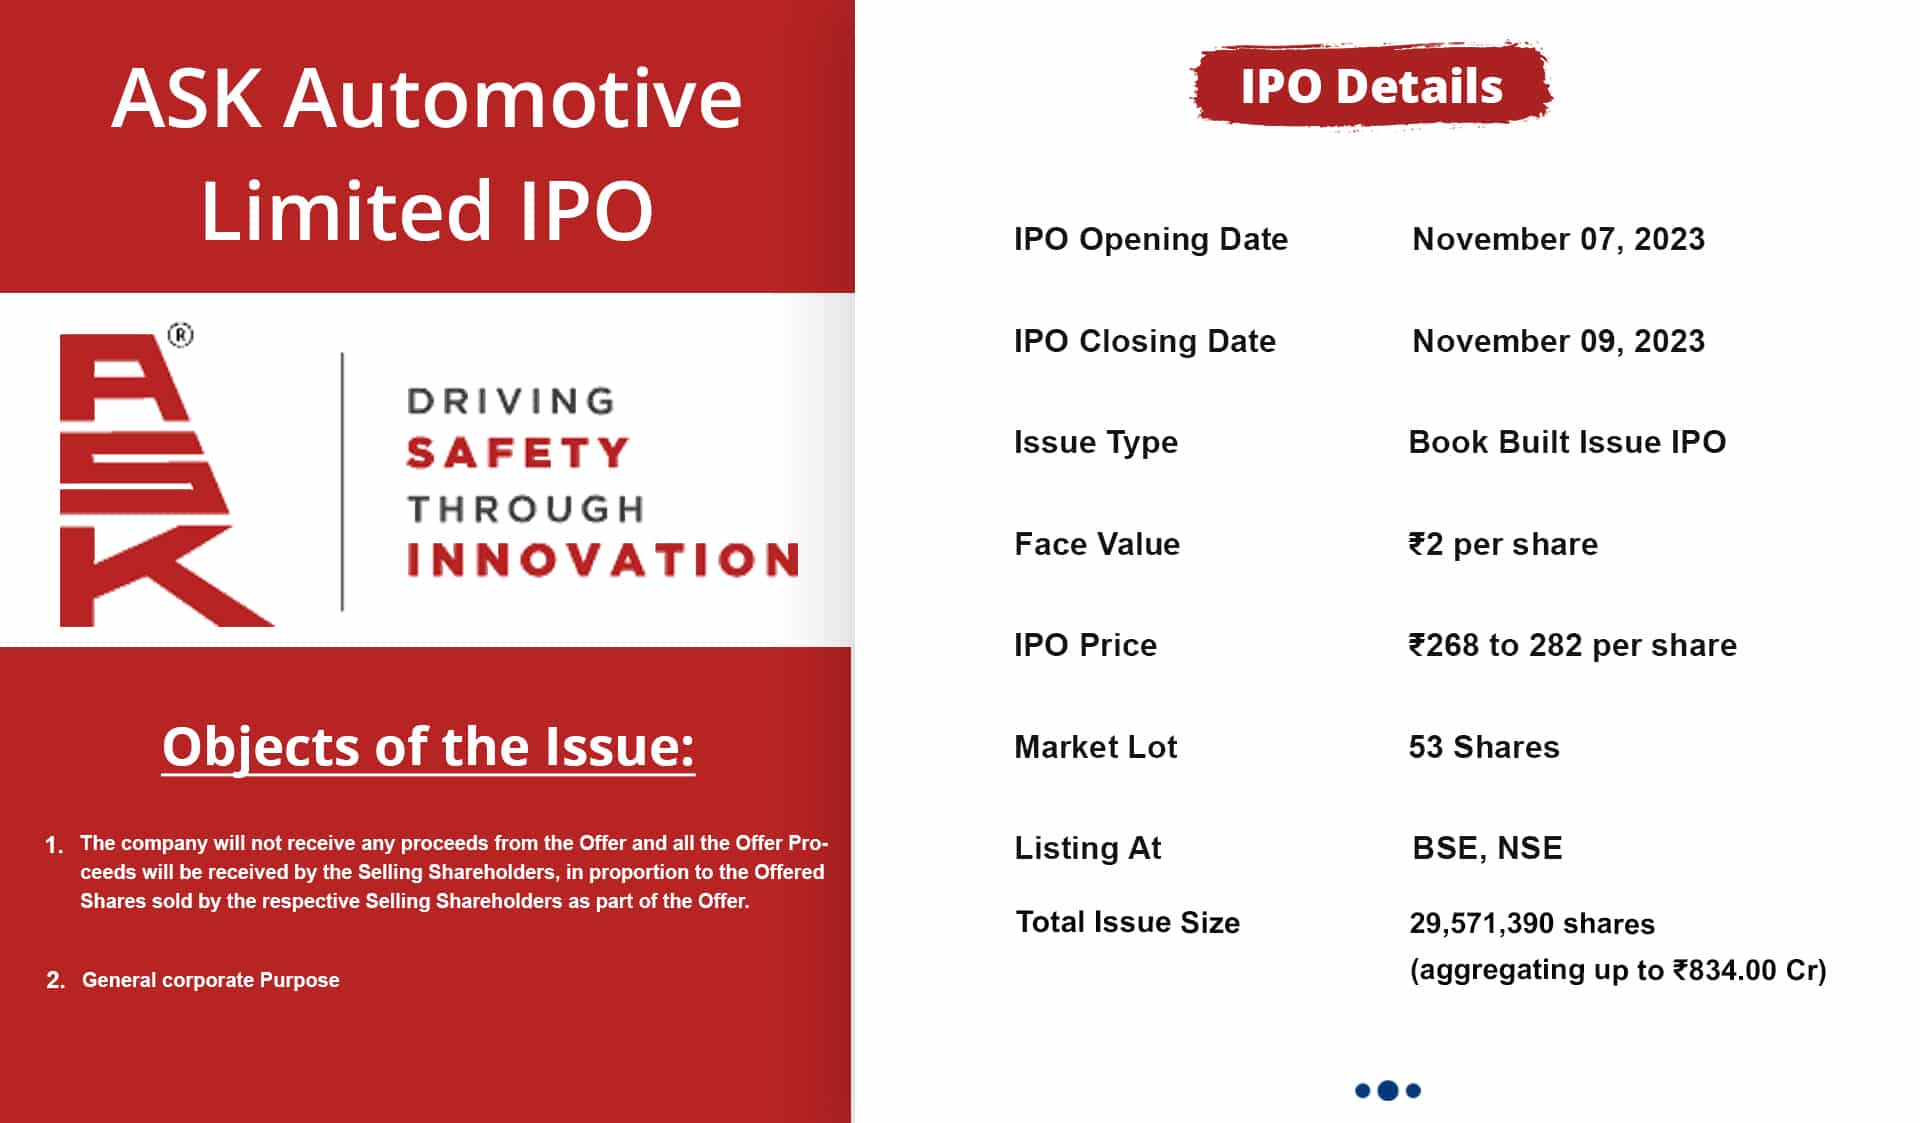 ASK Automotive Limited IPO